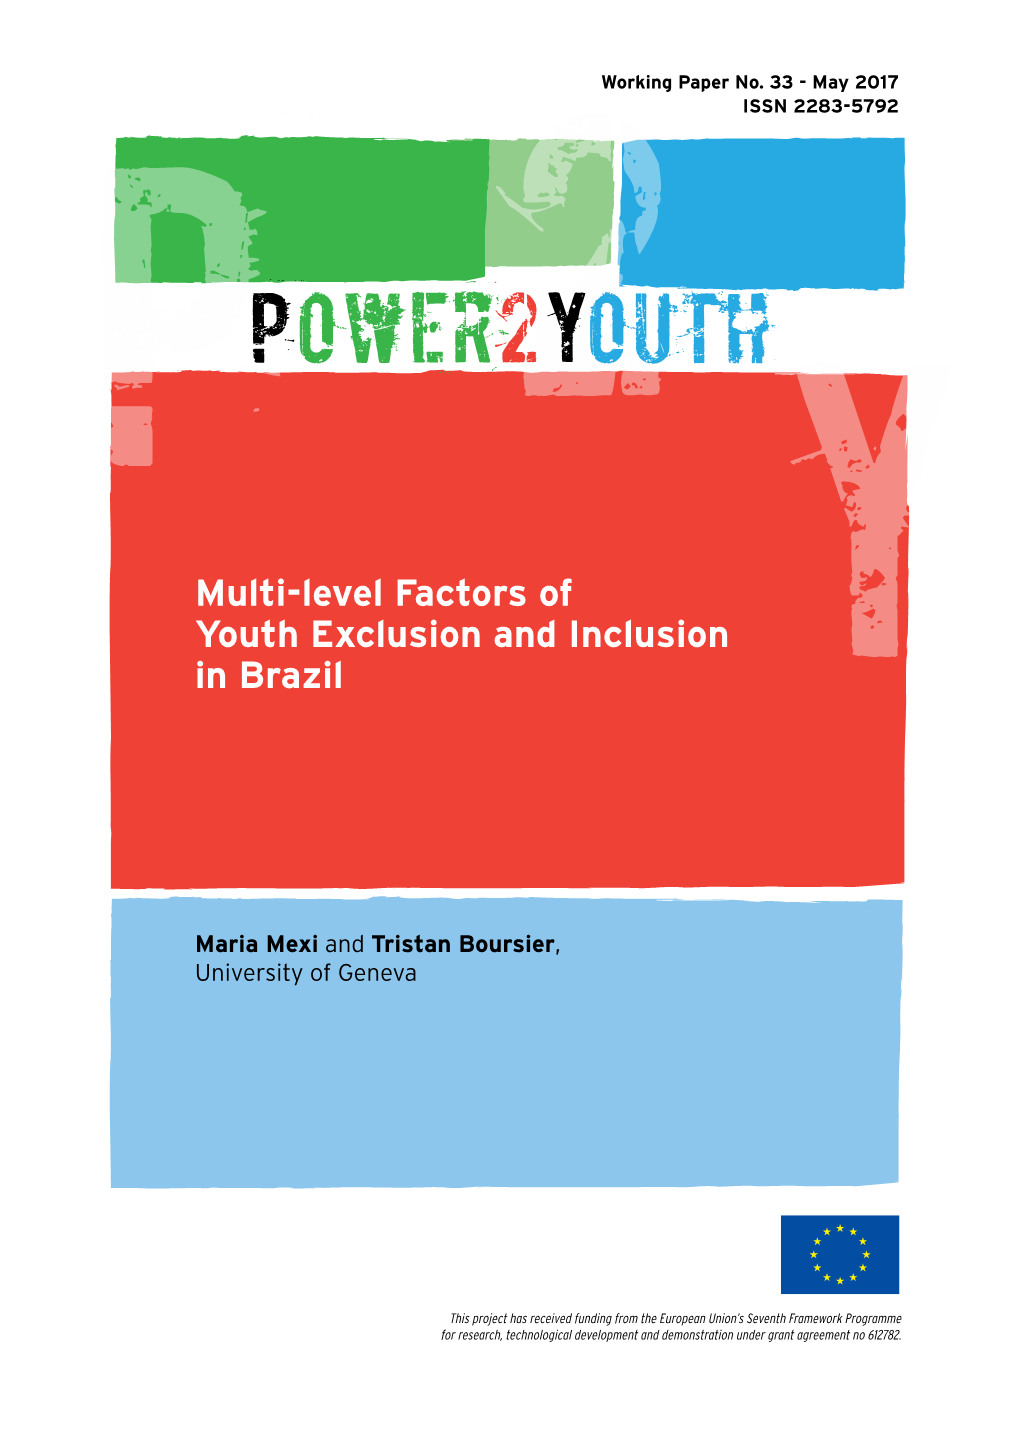 Multi-Level Factors of Youth Exclusion and Inclusion in Brazil